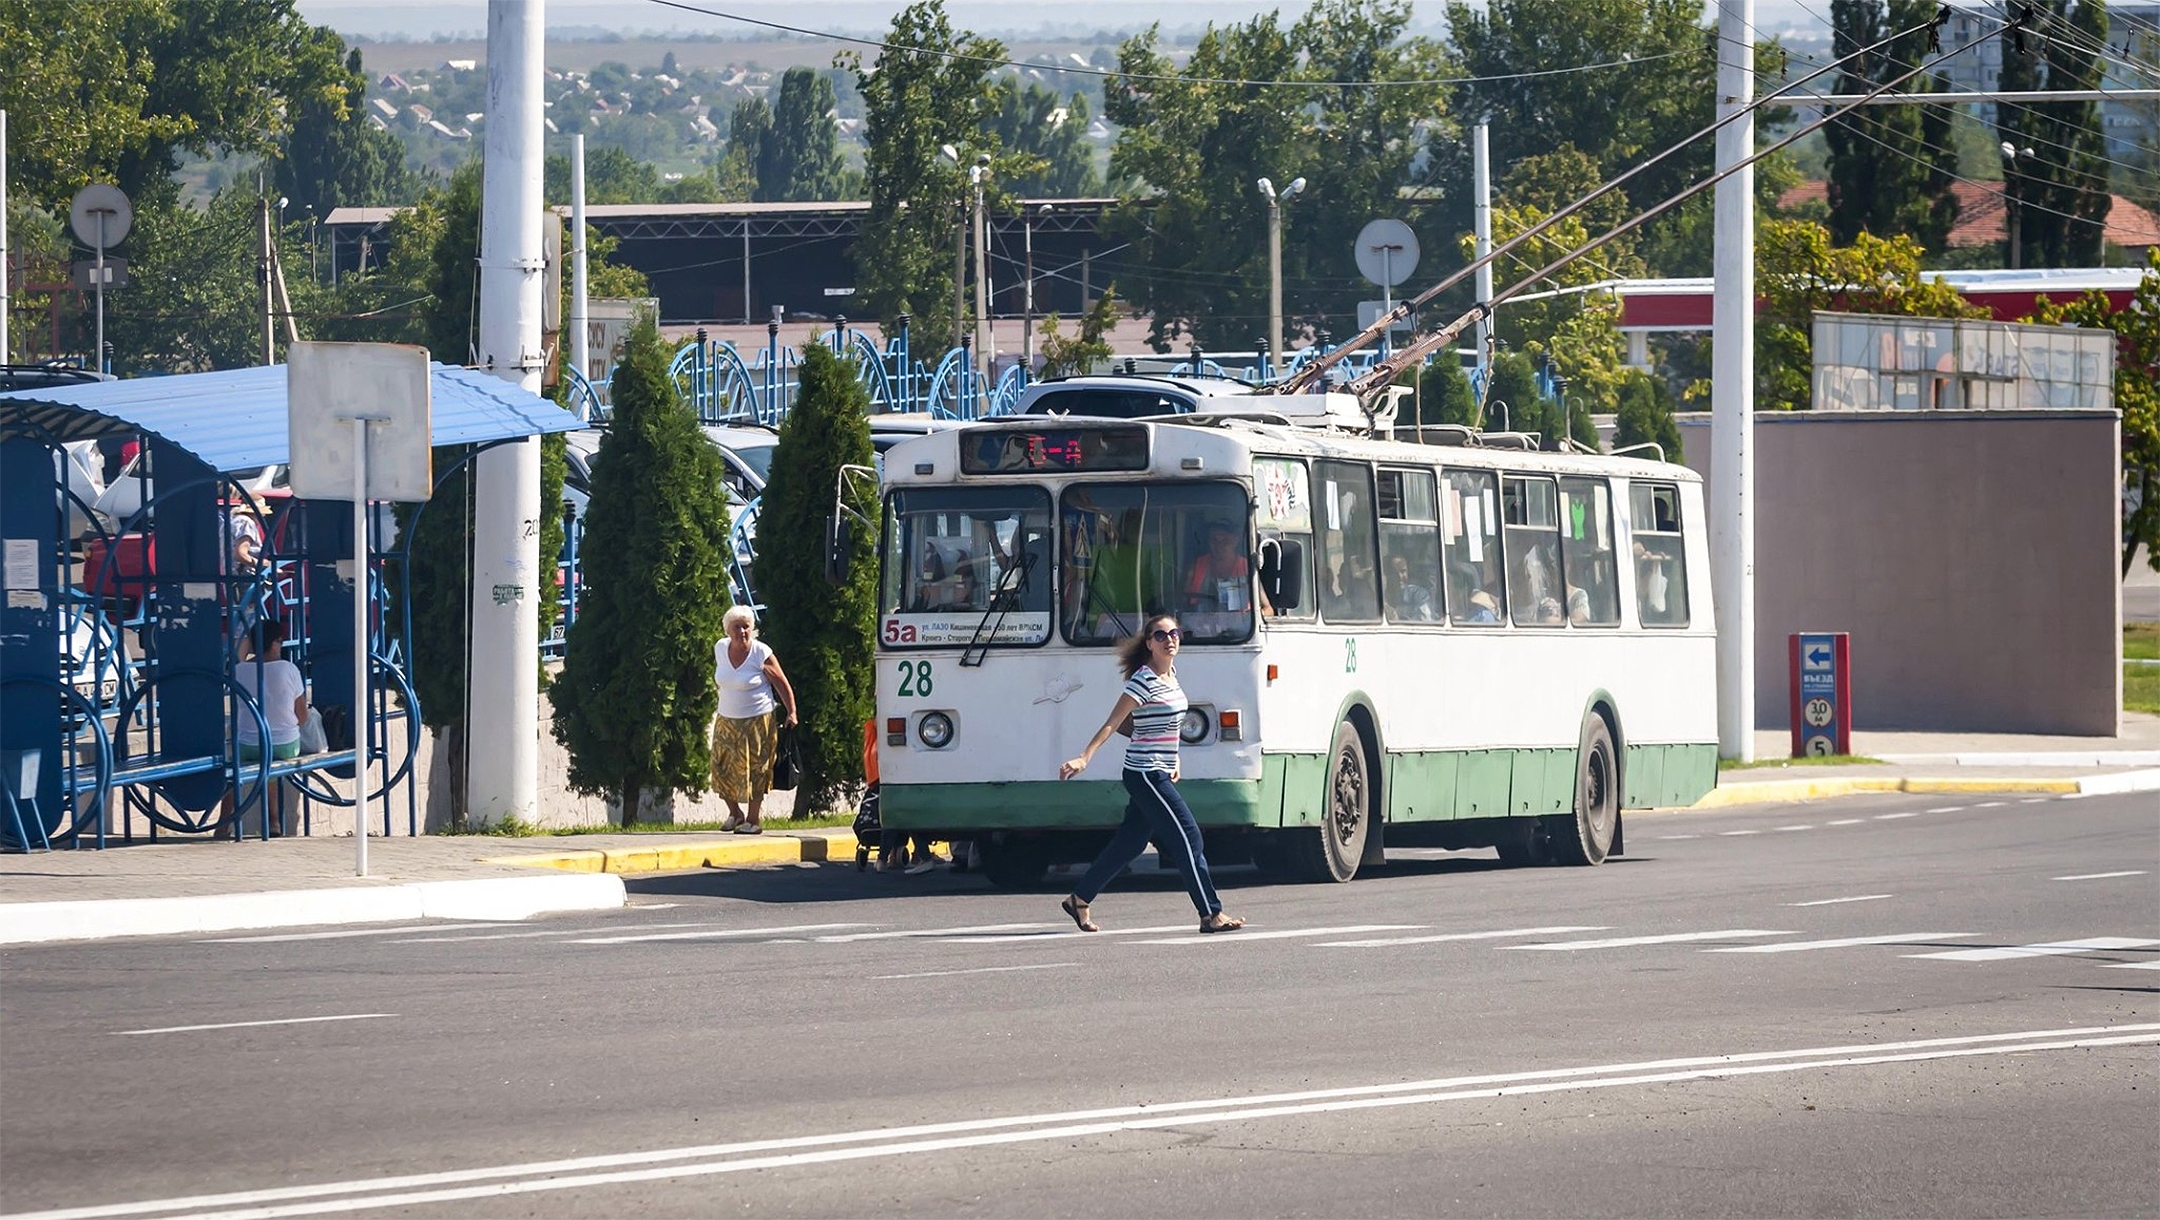 A woman crossing the road in Tiraspol, Transnistria on Aug. 24, 2019. (Courtesy of Roman Yanushevsky/Channel 9)